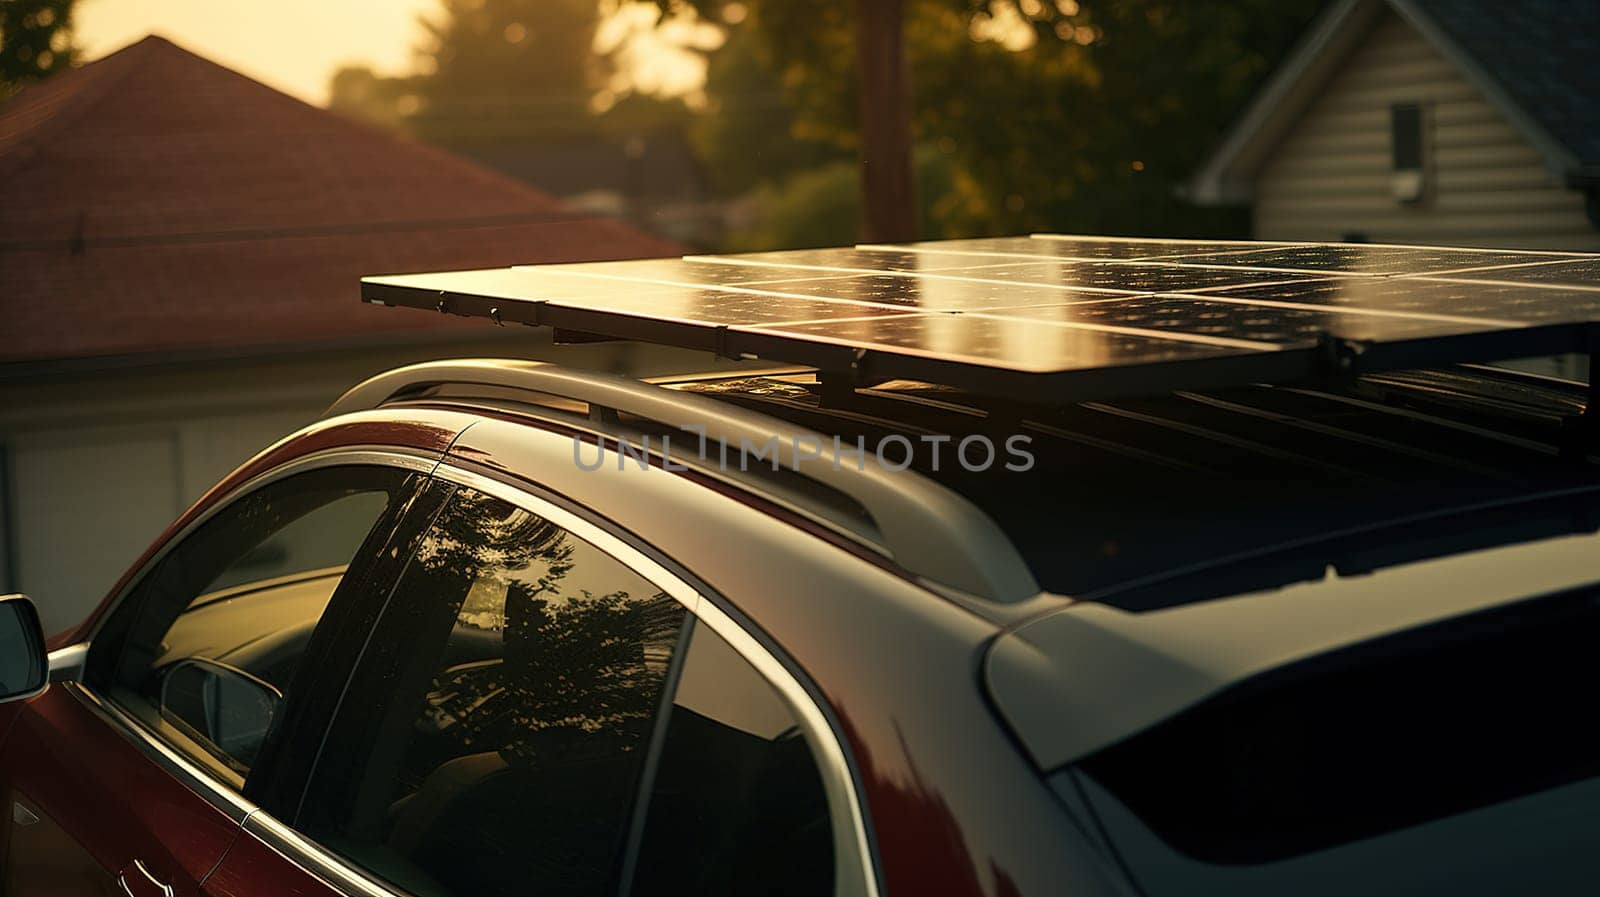 car with solar panels on the roof, use of modern technologies in everyday life,eco friendly method of energy production by KaterinaDalemans